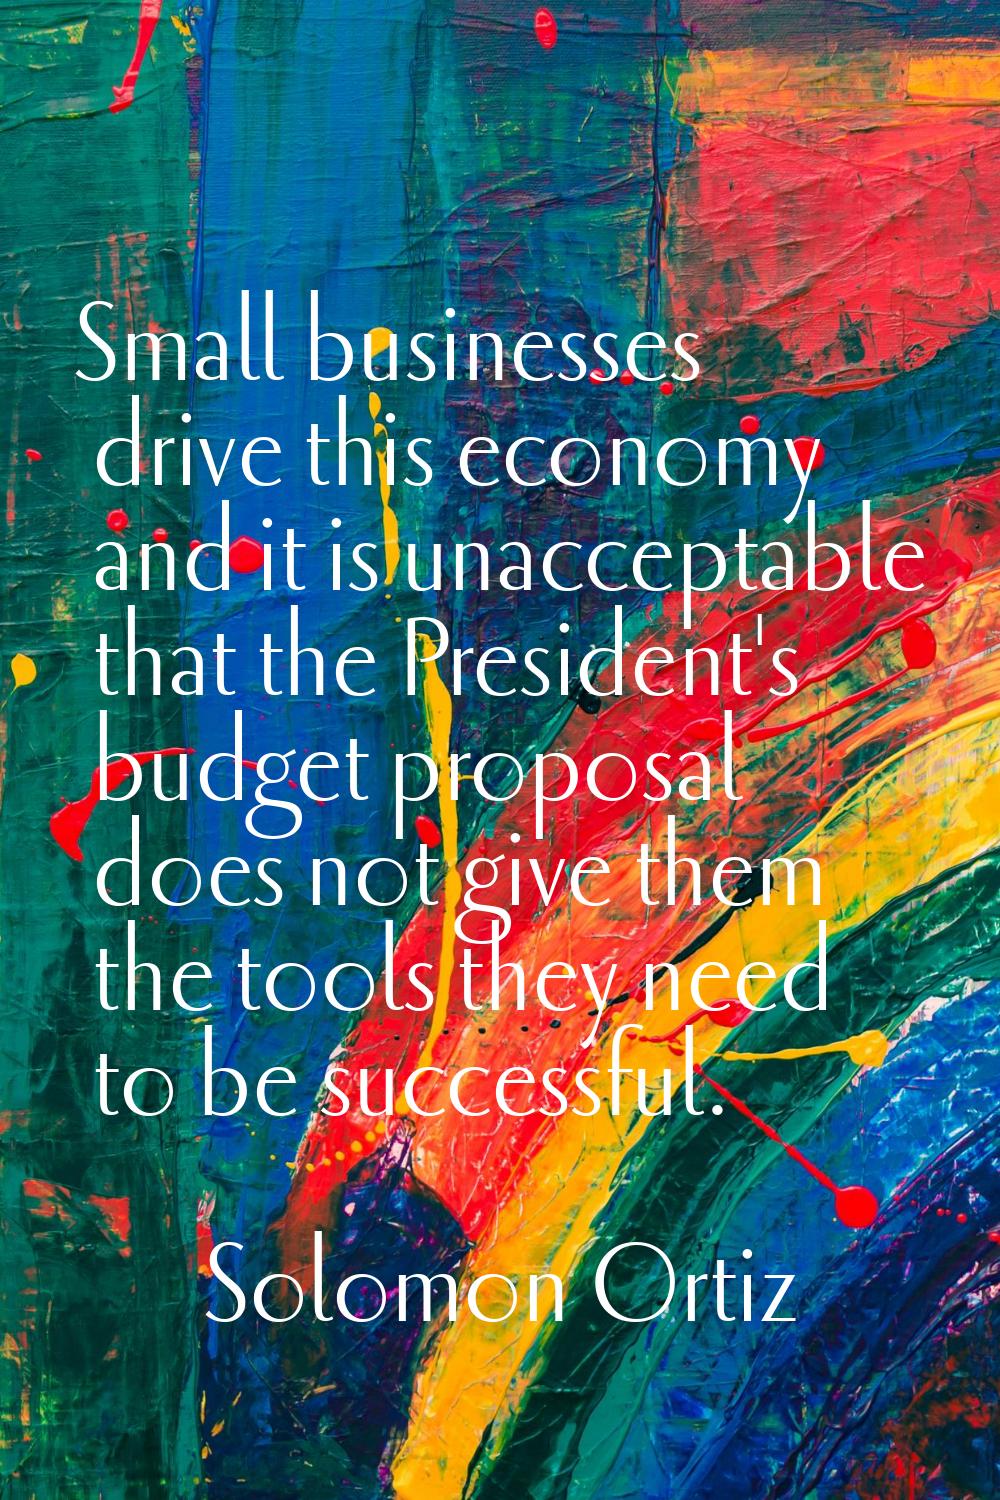 Small businesses drive this economy and it is unacceptable that the President's budget proposal doe